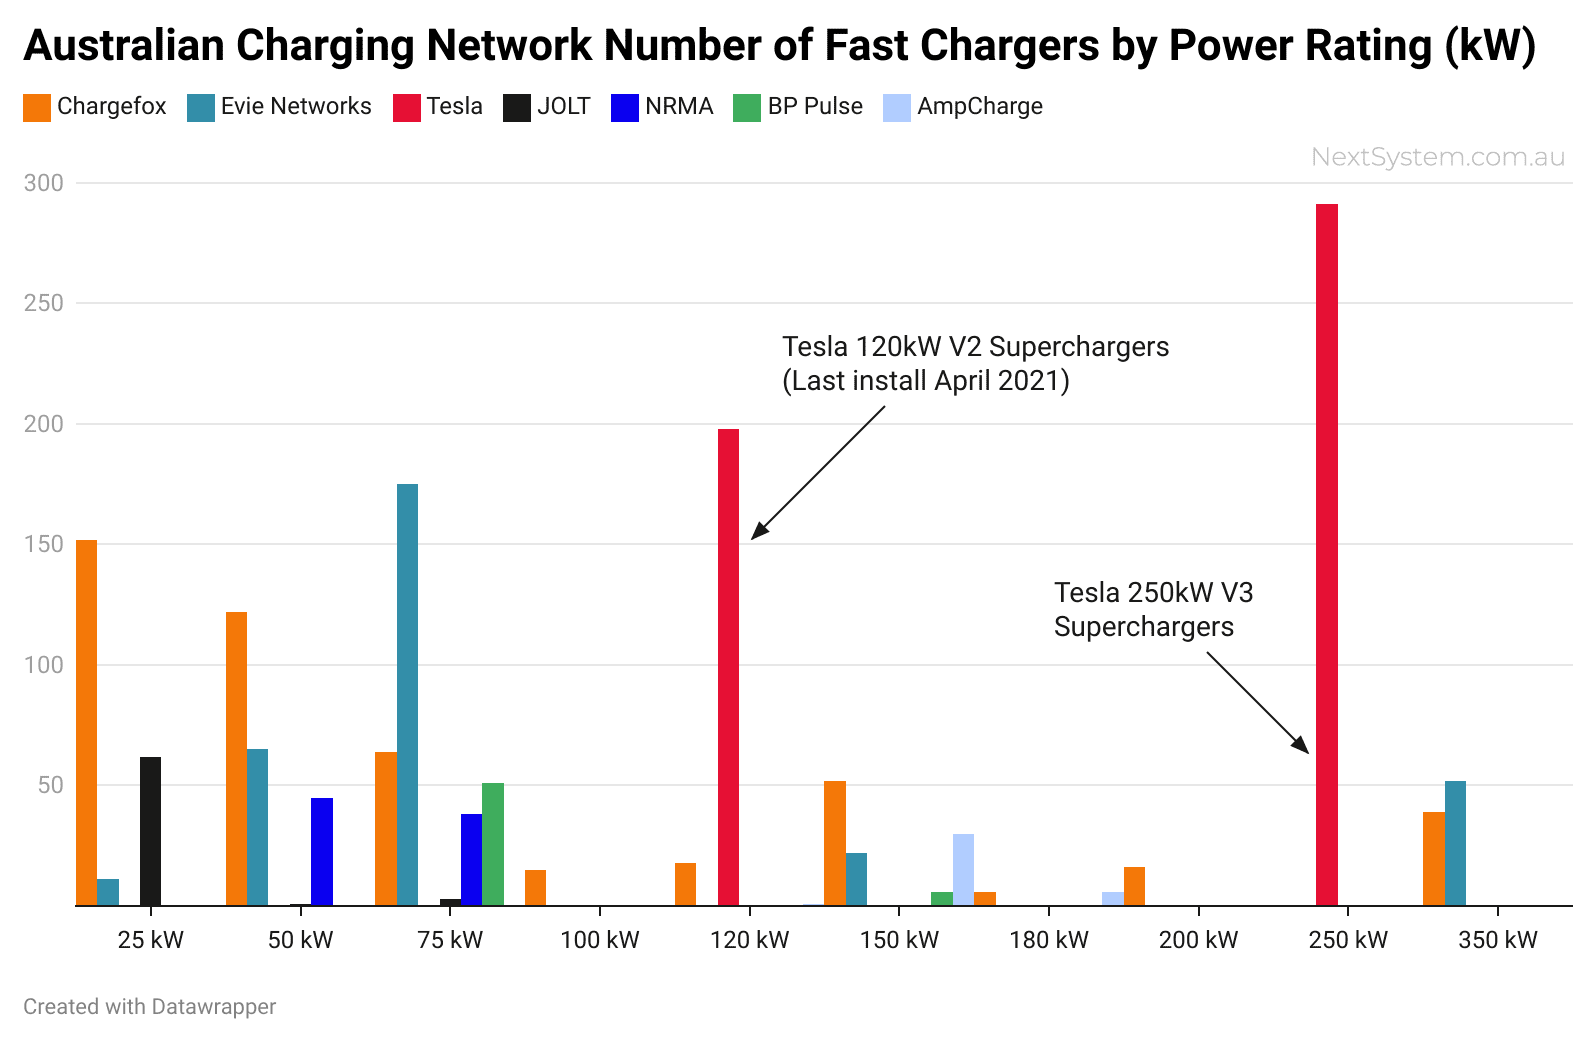 Australian Charging Network Number of Fast Chargers by Power Rating (kW)